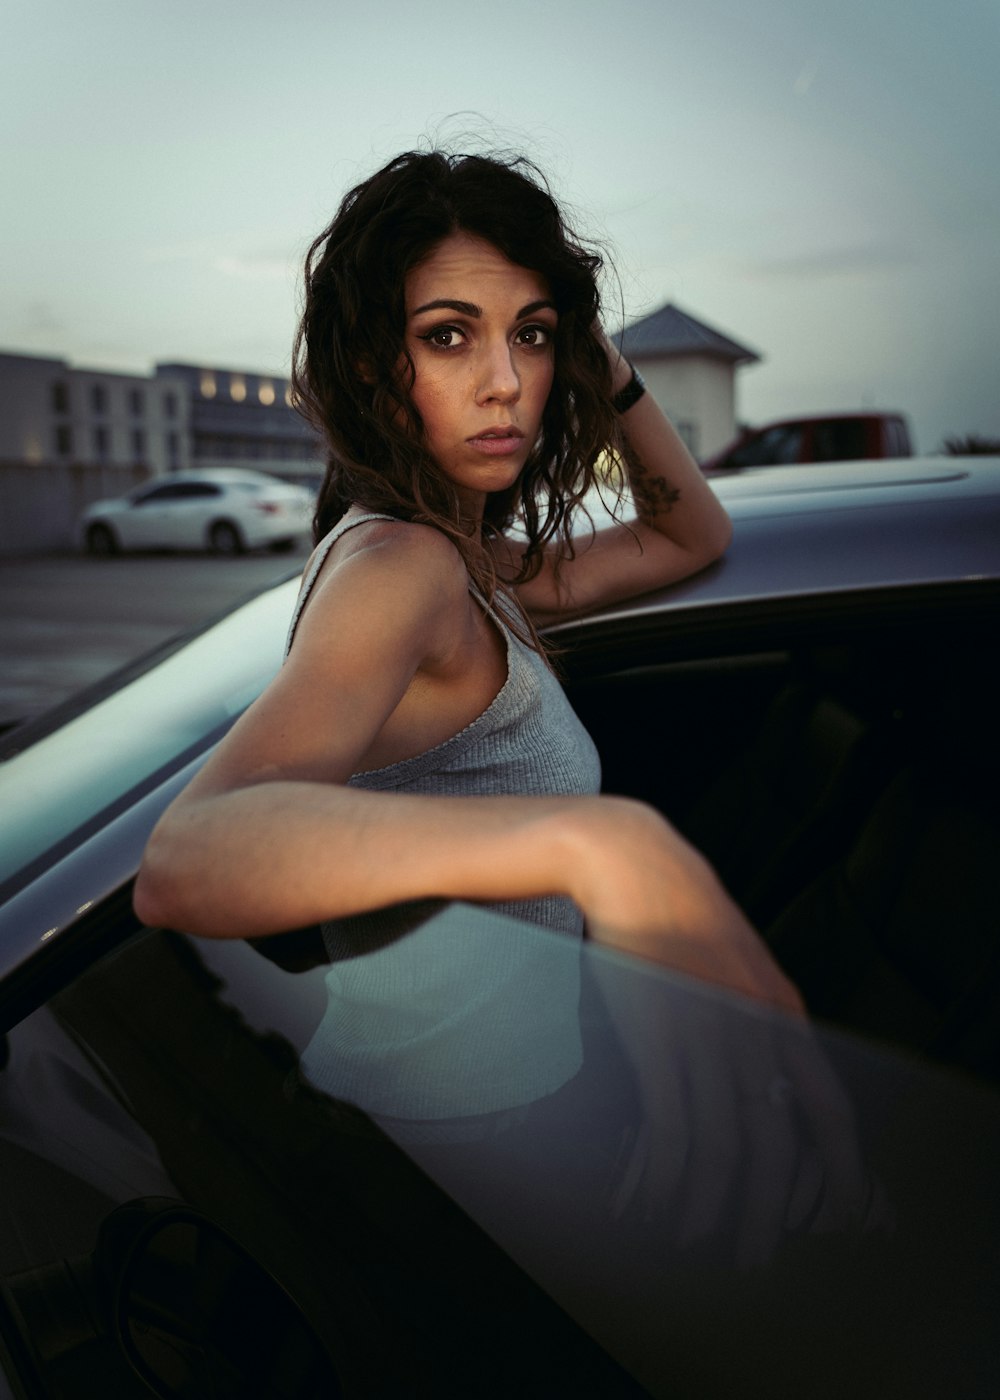 woman in gray tank top sitting on car hood during daytime